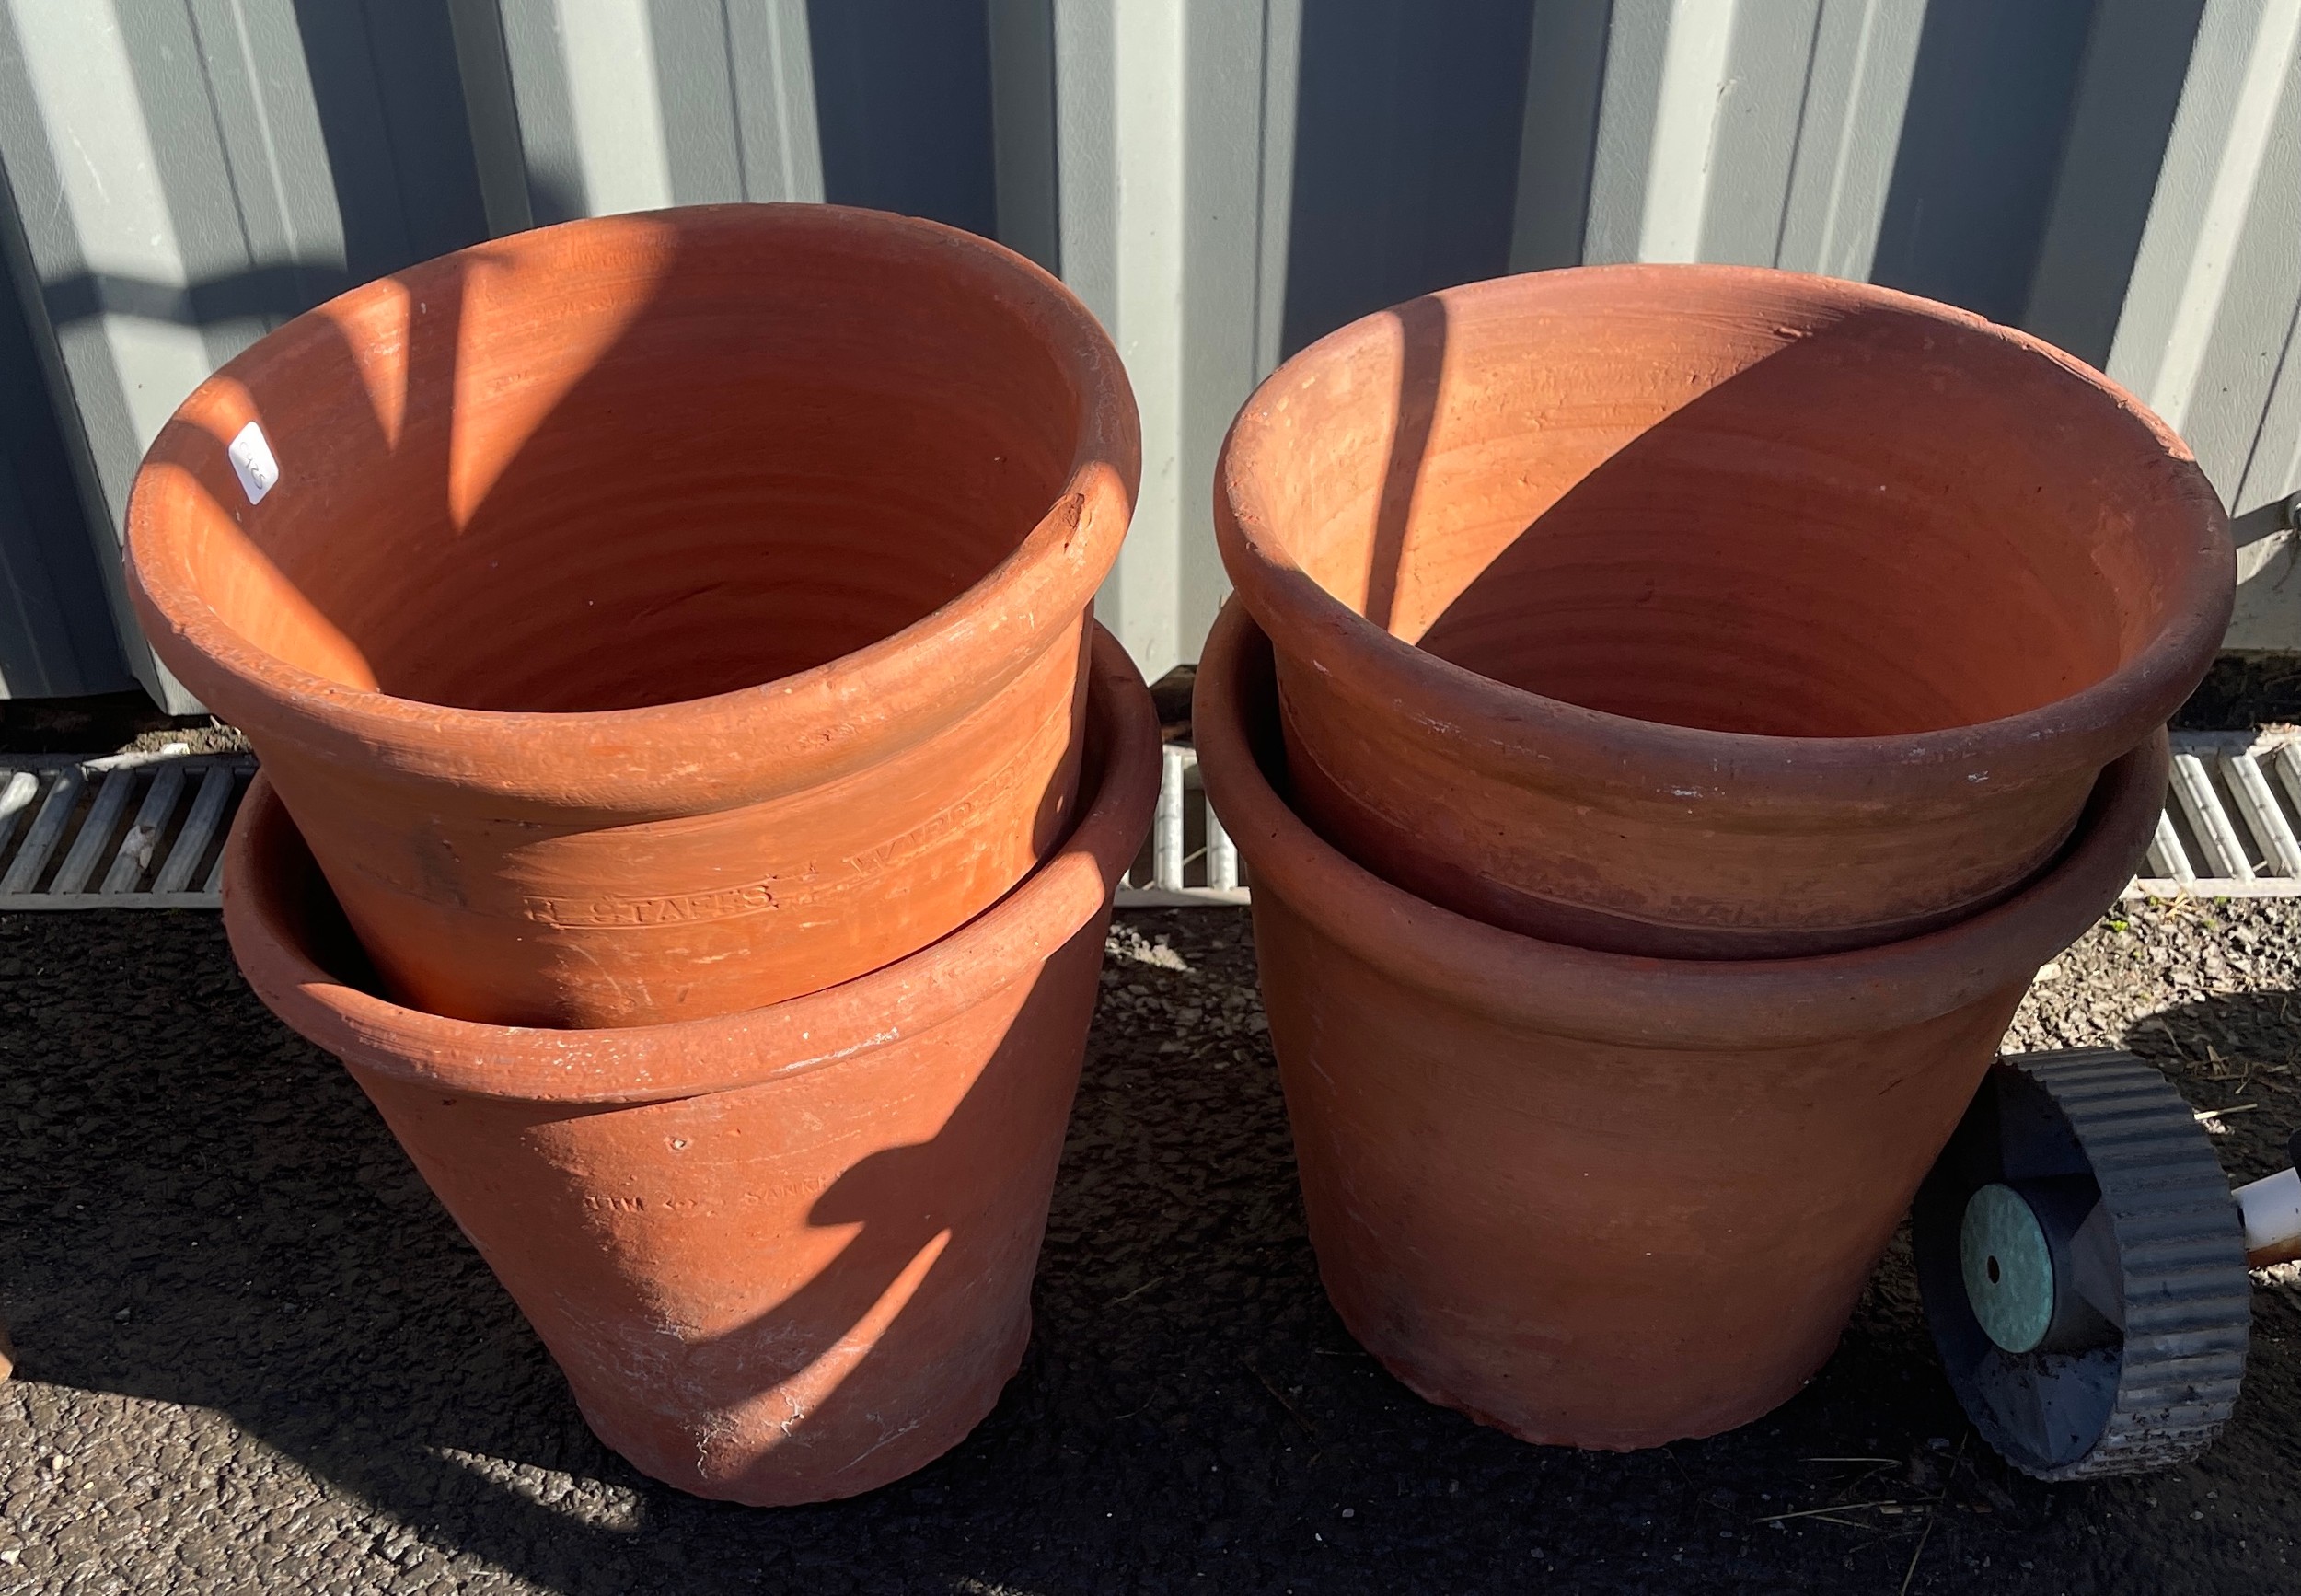 Selection of 4 plant pots